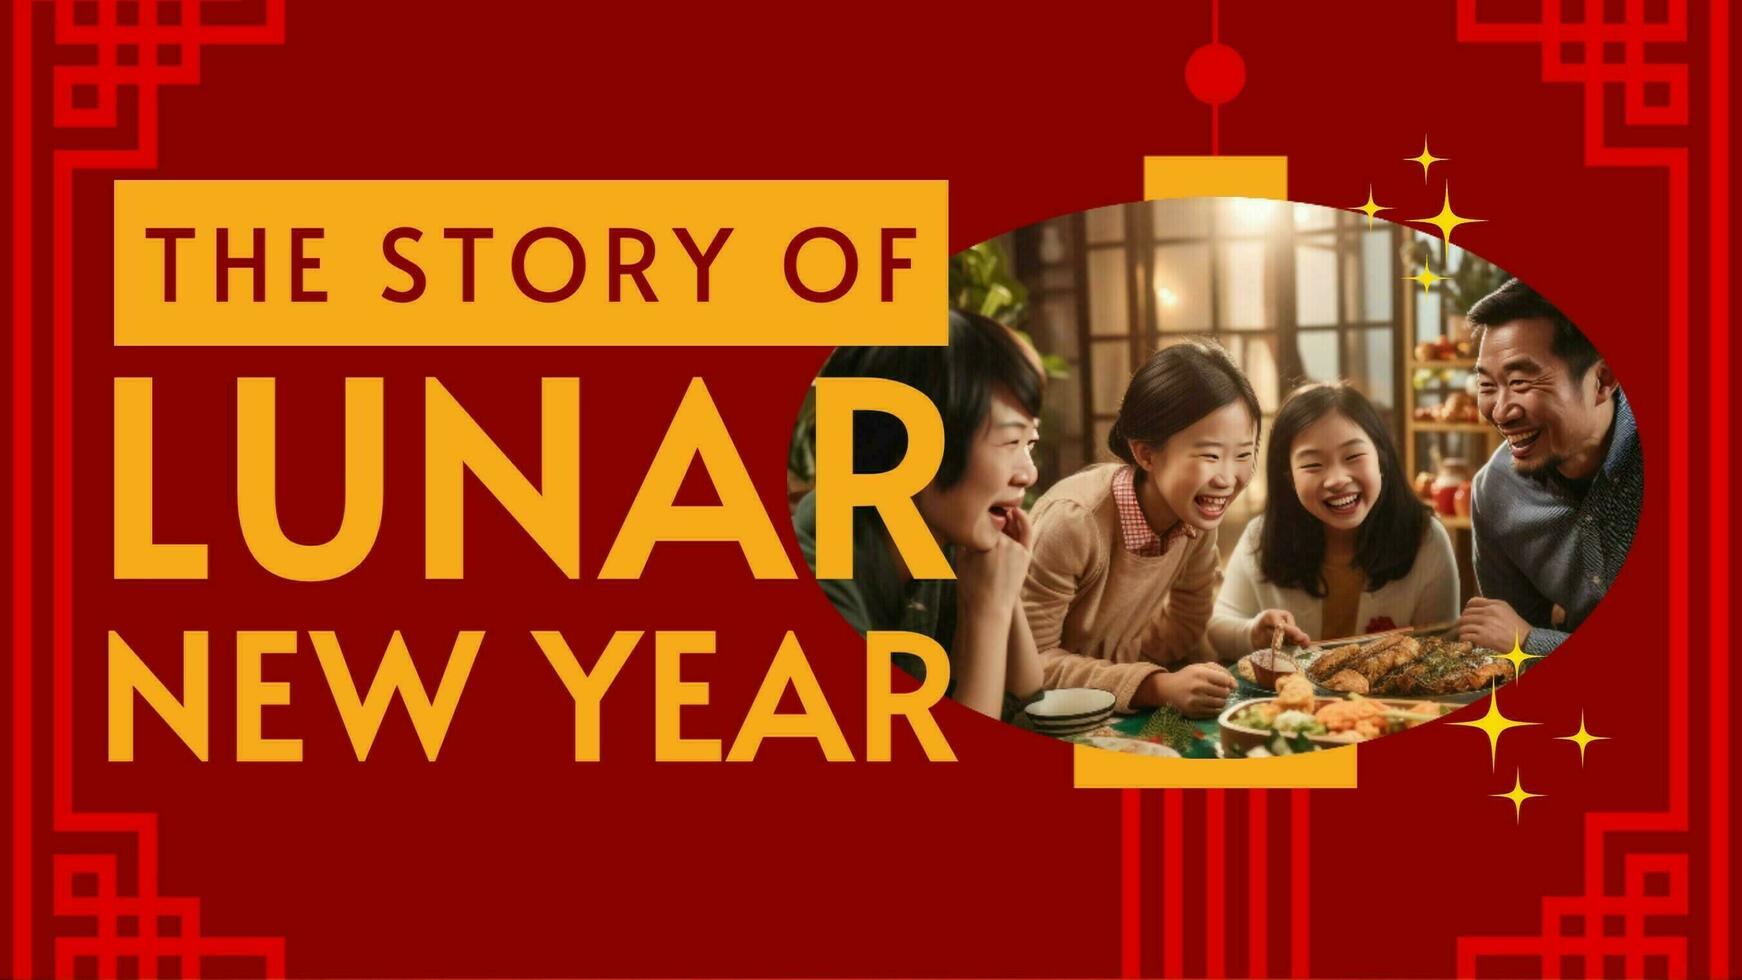 The Story Of Lunar New Year for Youtube Thumbnail template